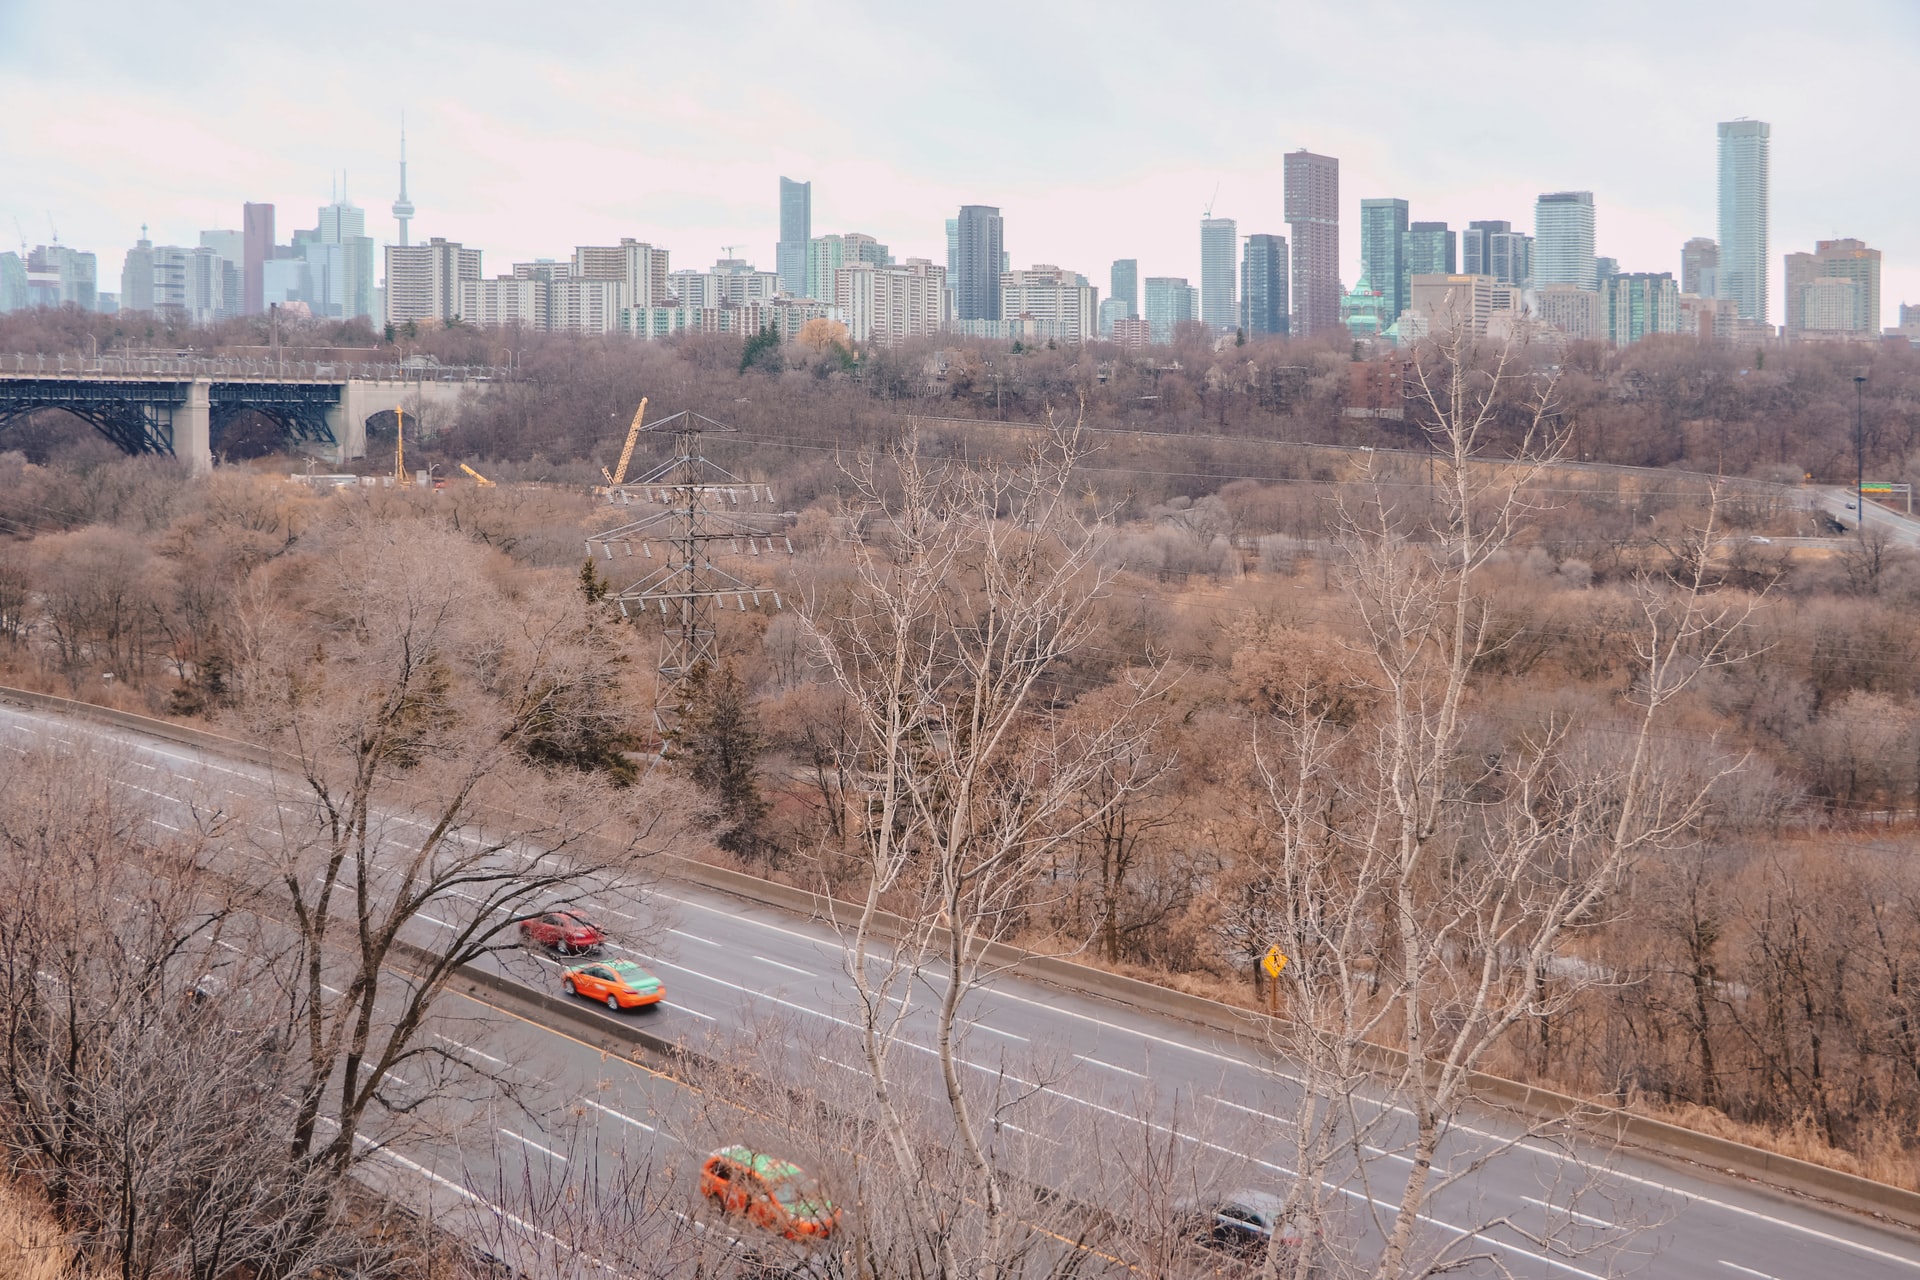 Supporting Federal Environmental Assessment Requests for Ontario’s Proposed 400-series Highways